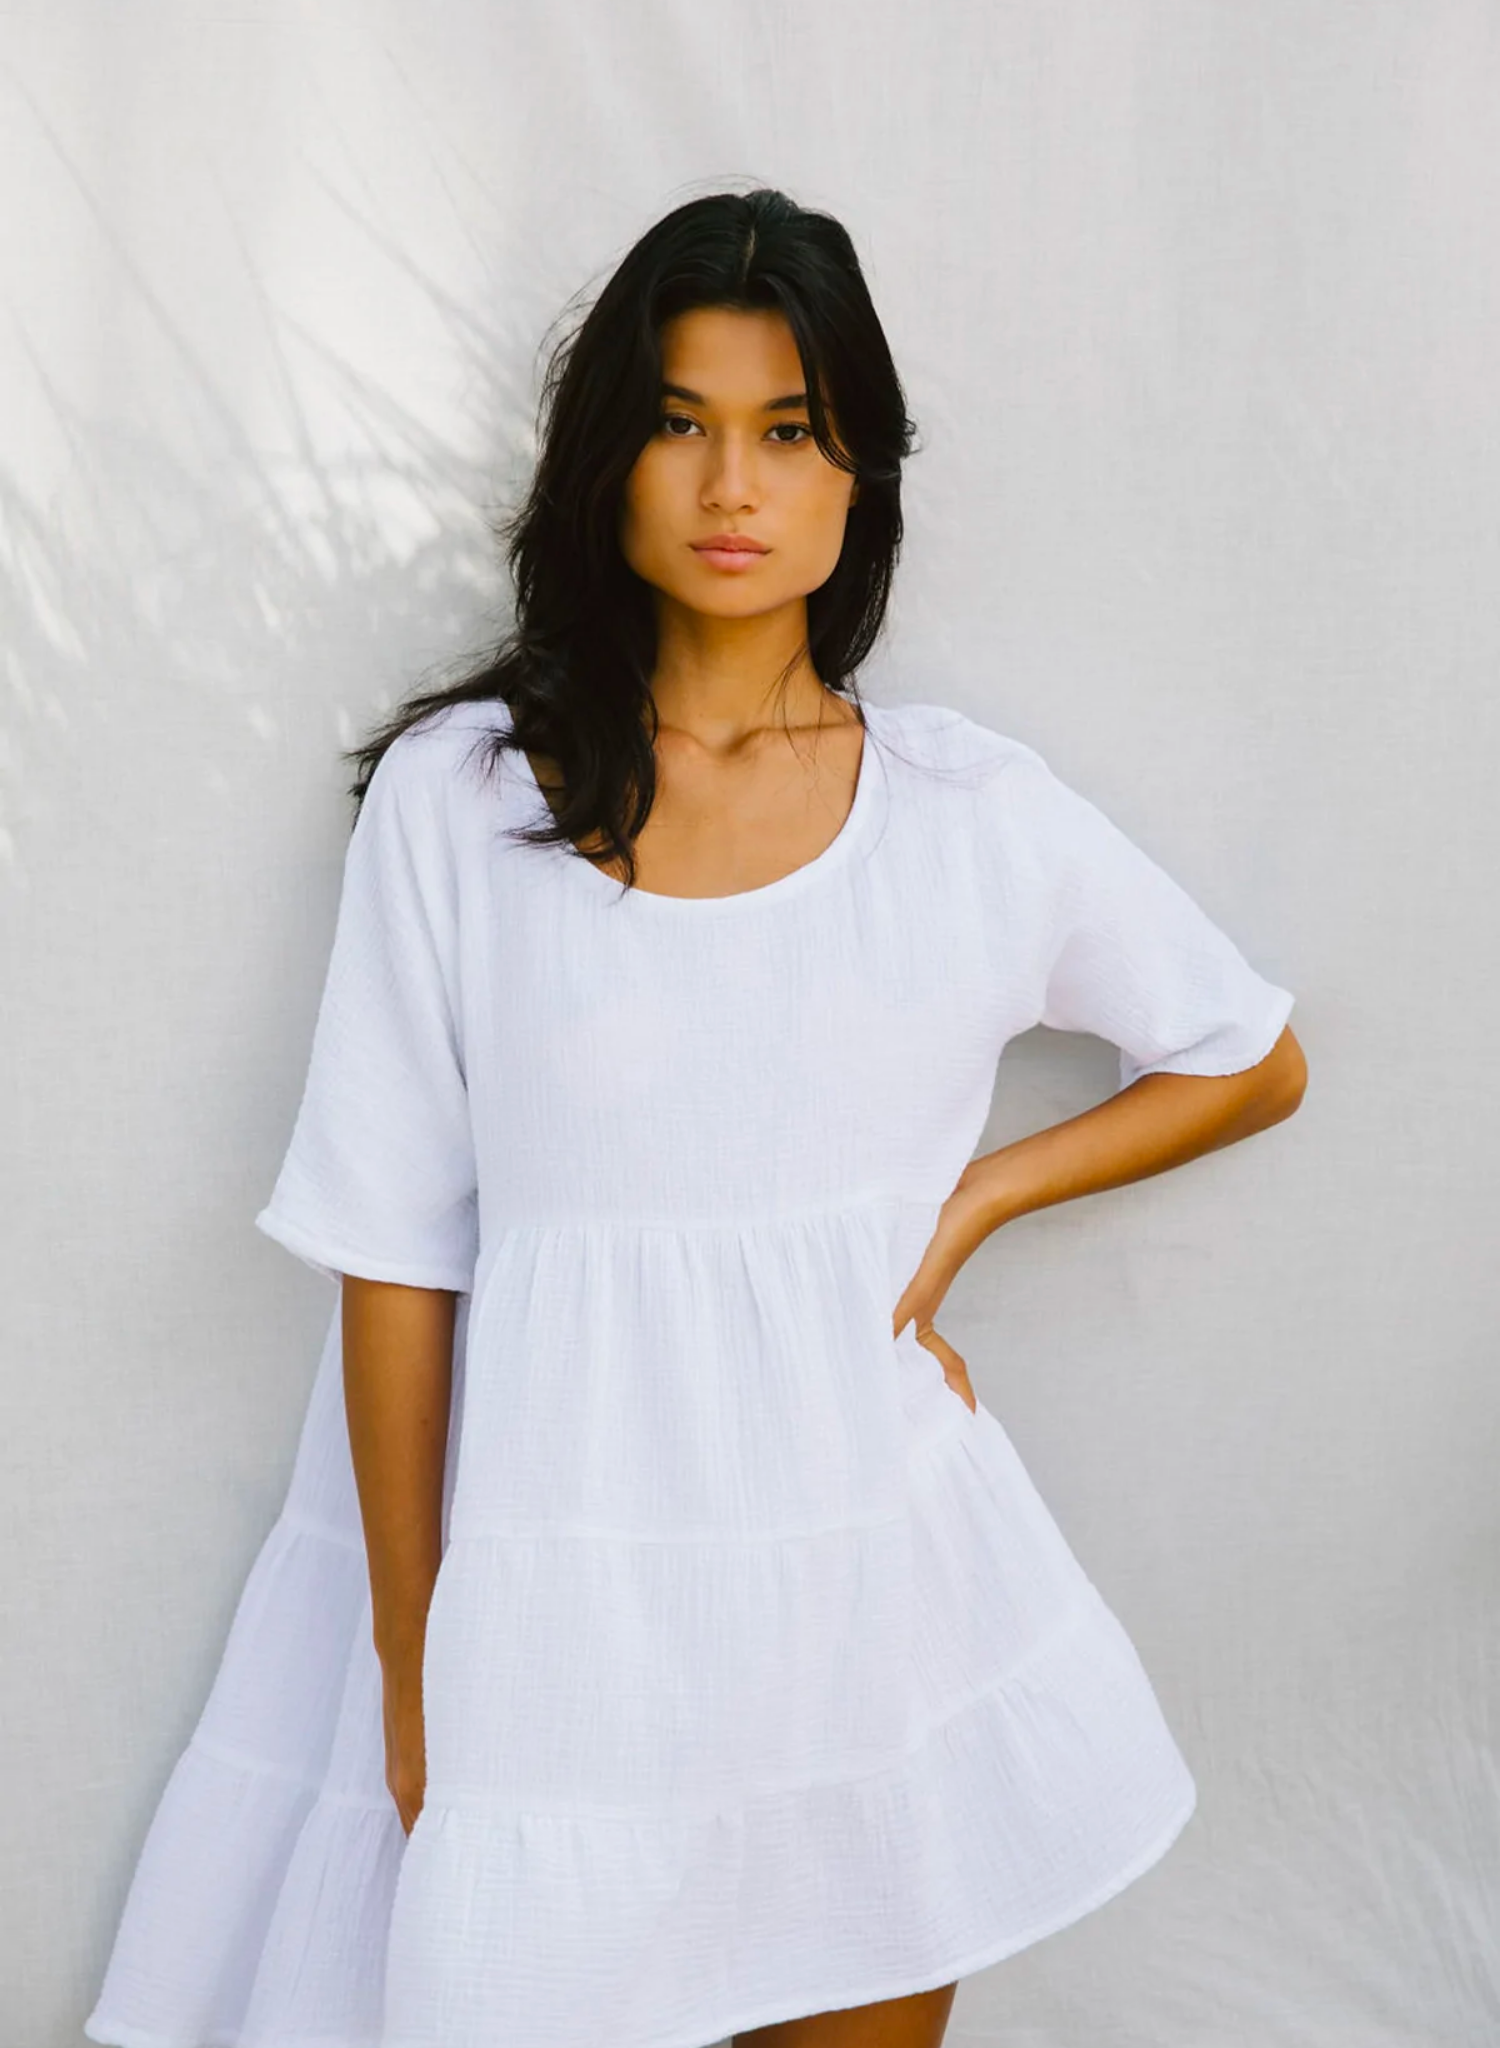 This oversized baby-doll is the perfect chuck on mini dress. Made from the softest natural cotton bubble, you will want to live in this dress all season long.Featuring a flattering scooped neckline a longer sleeve and a tiered baby doll skirt. Paired with sandals or heels it makes a cute day or night outfit.